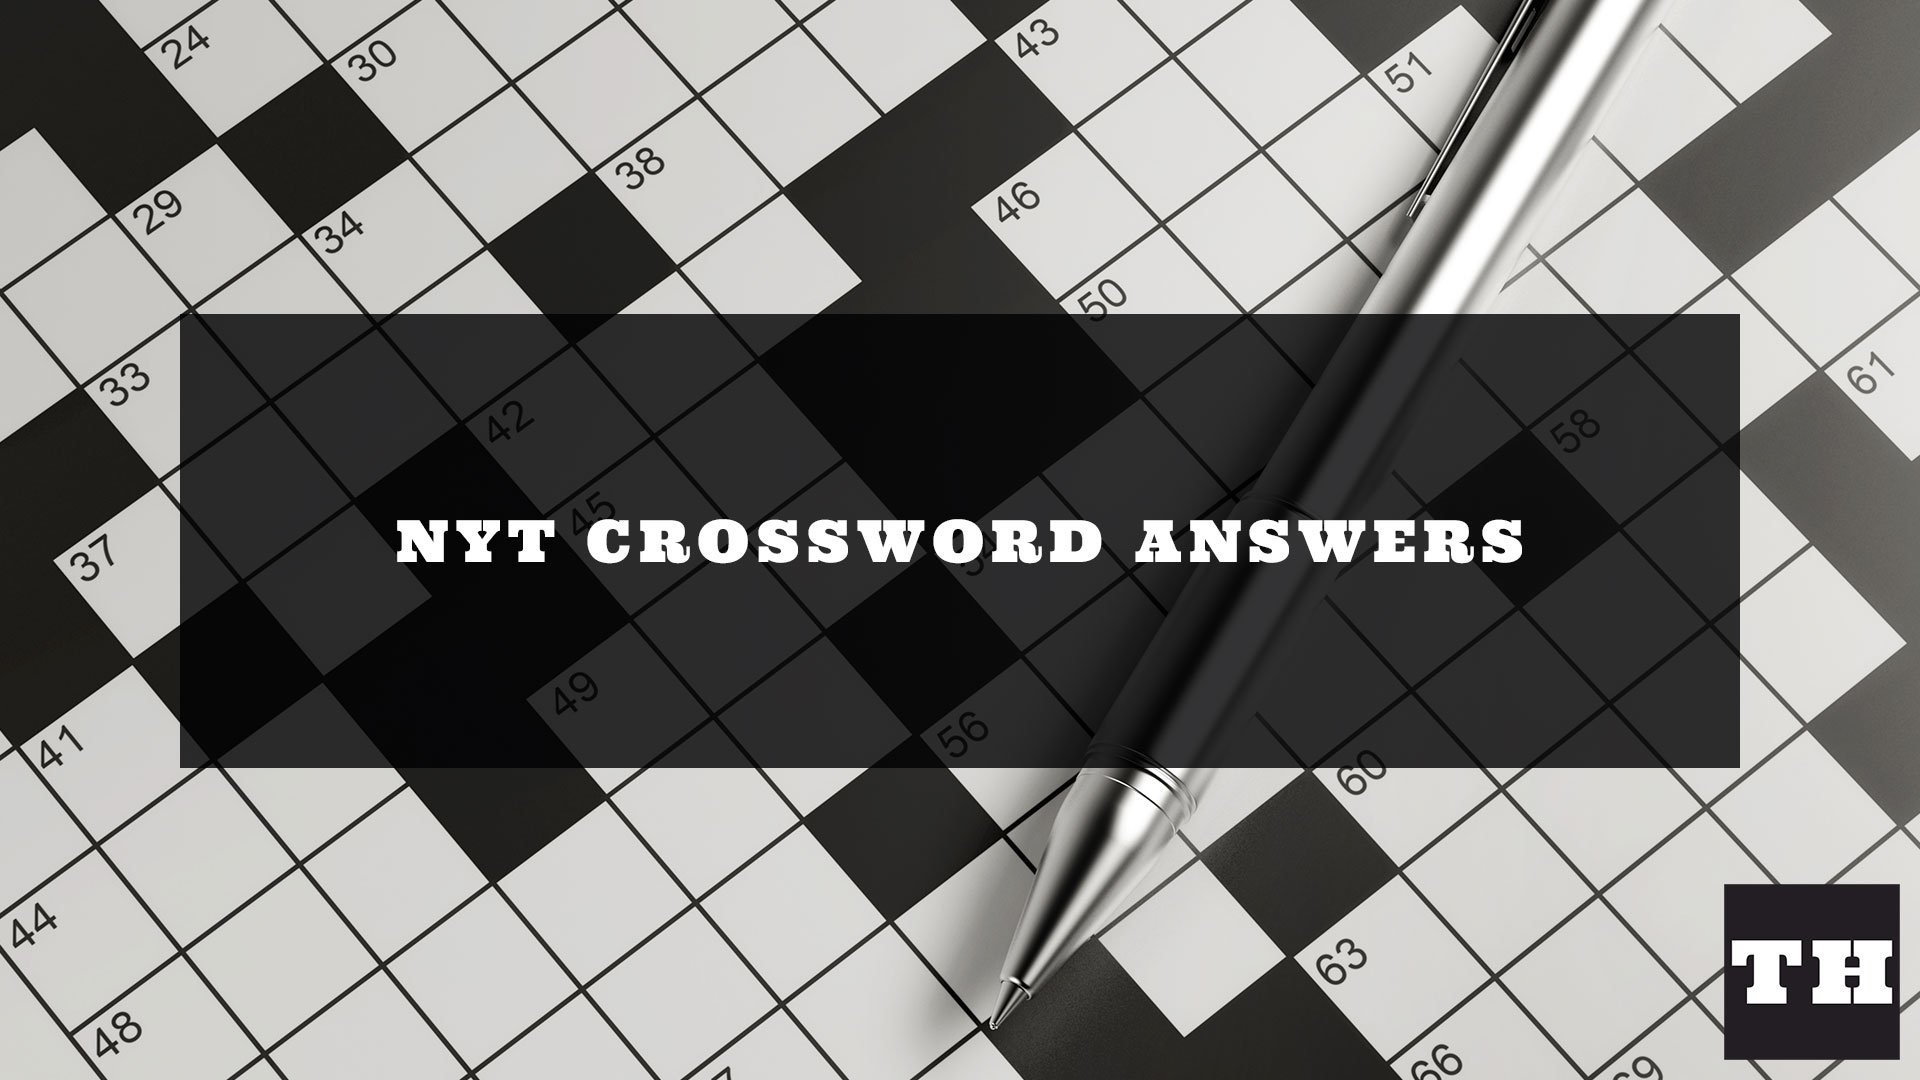 Today’s New York Times Crossword Answers